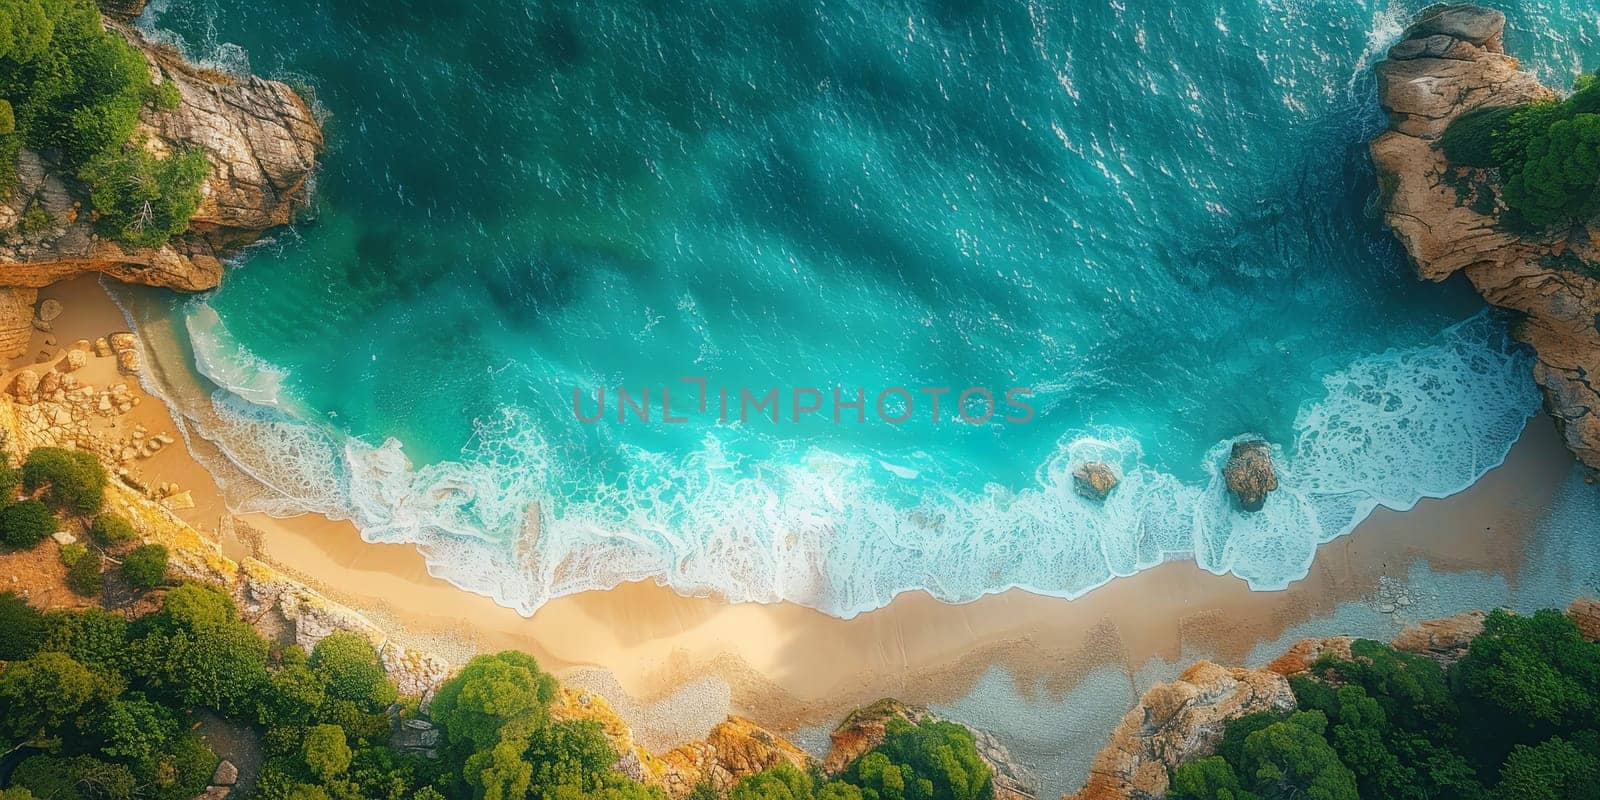 A beautiful beach with a rocky shoreline and a clear blue ocean. The water is calm and the sky is clear